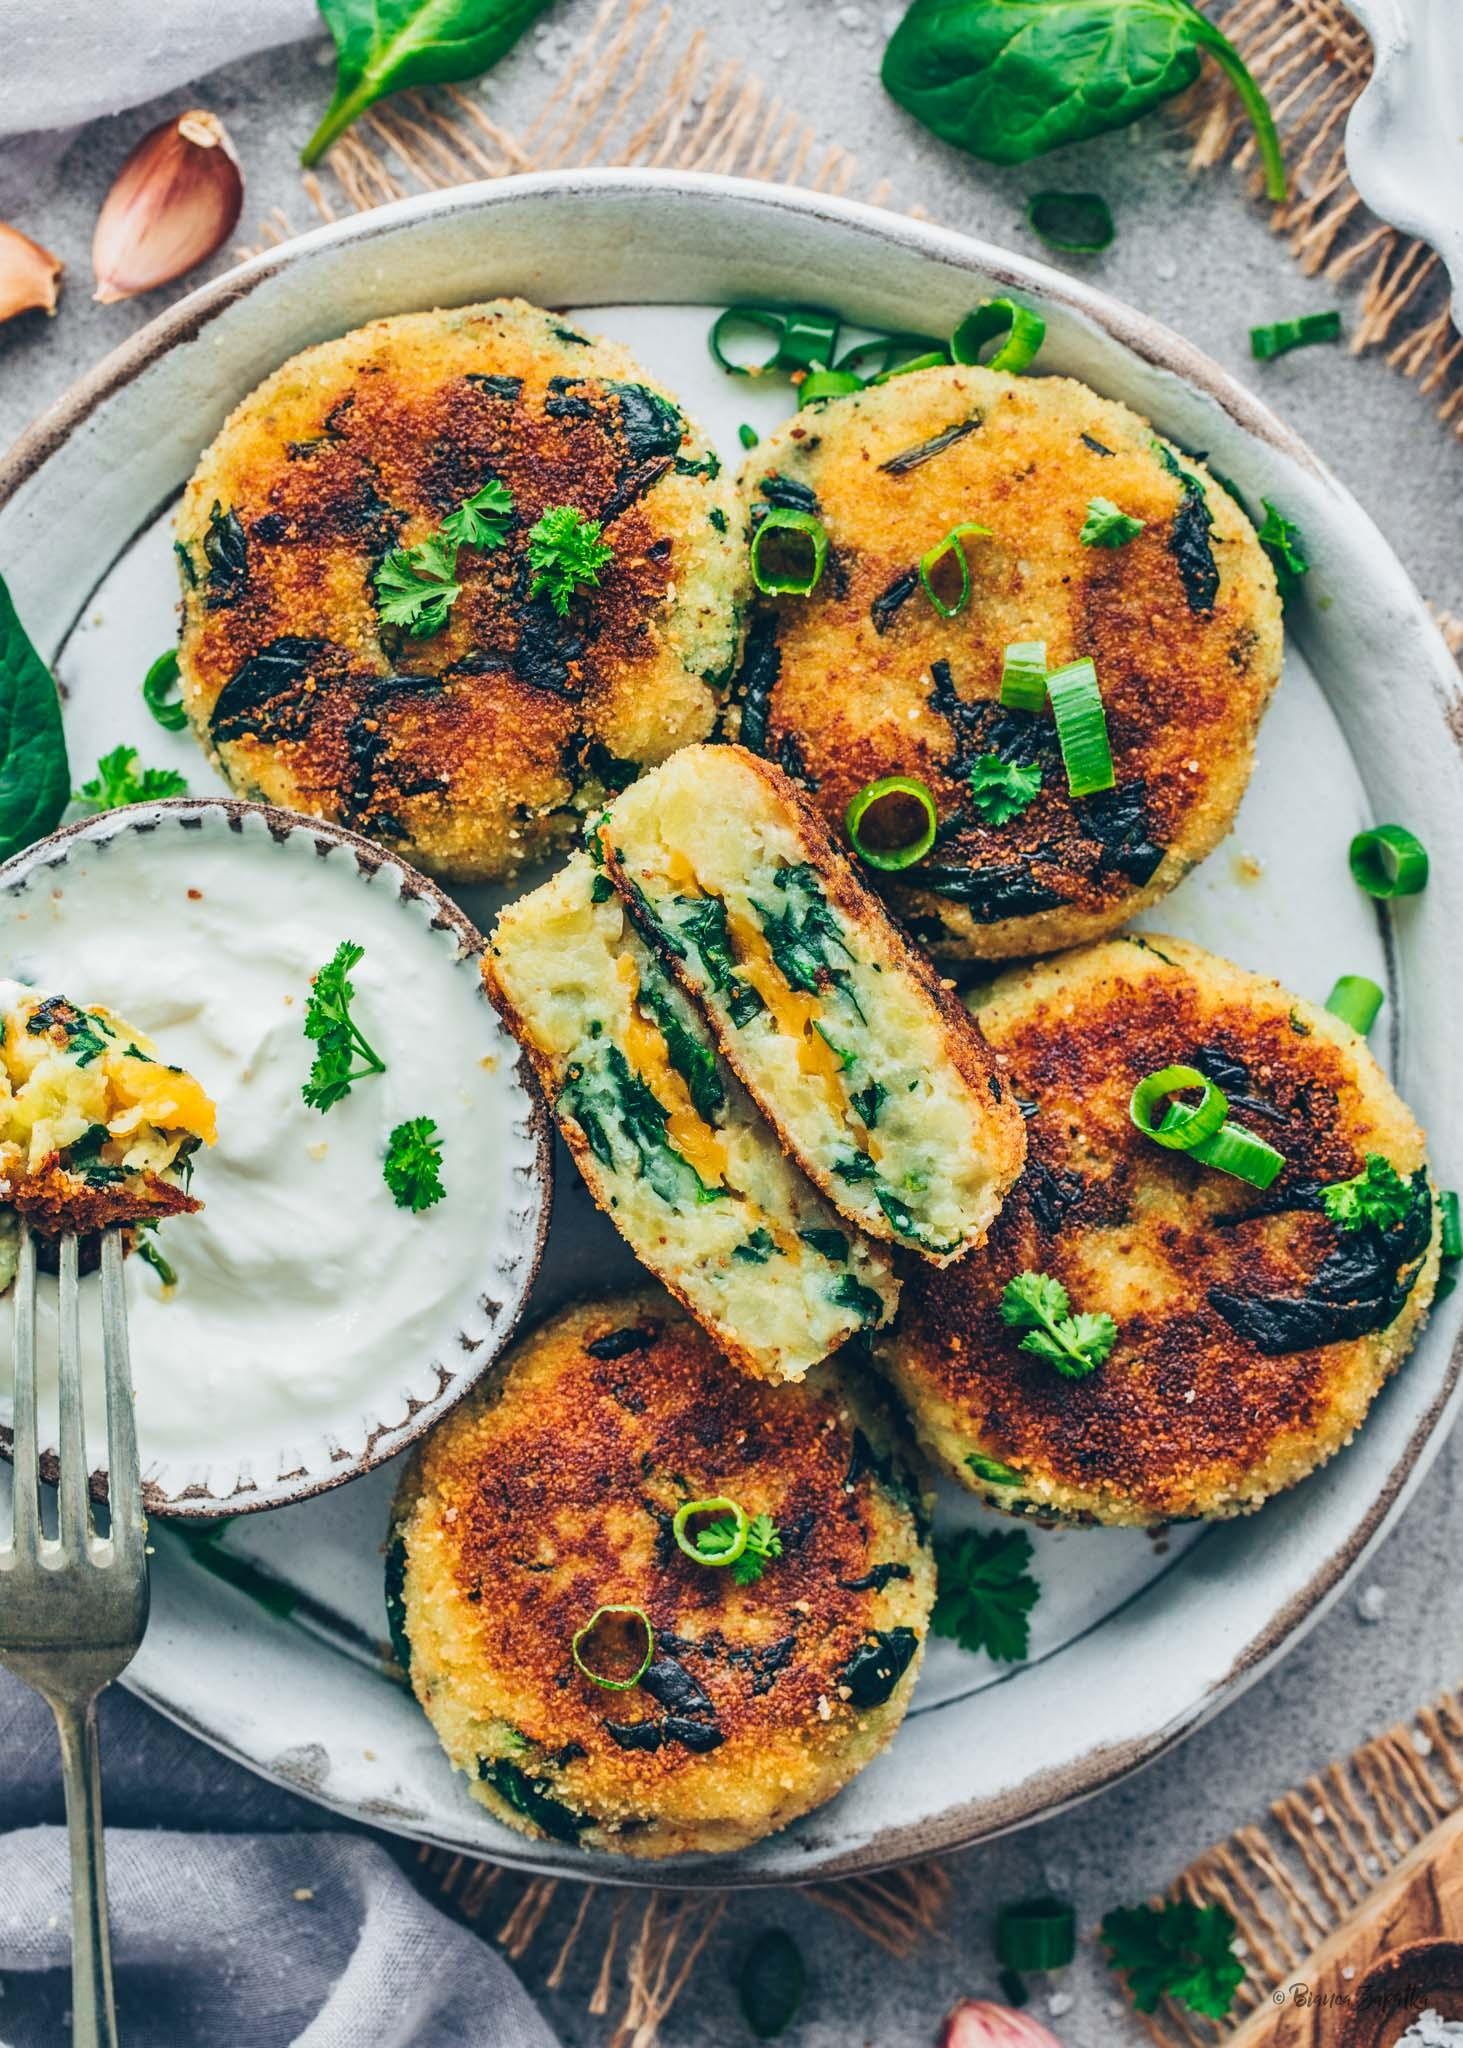 Spinach potato cakes, Vegan cheese filling, Bianca Zapatka's recipe, Delicious and healthy, 1470x2050 HD Handy